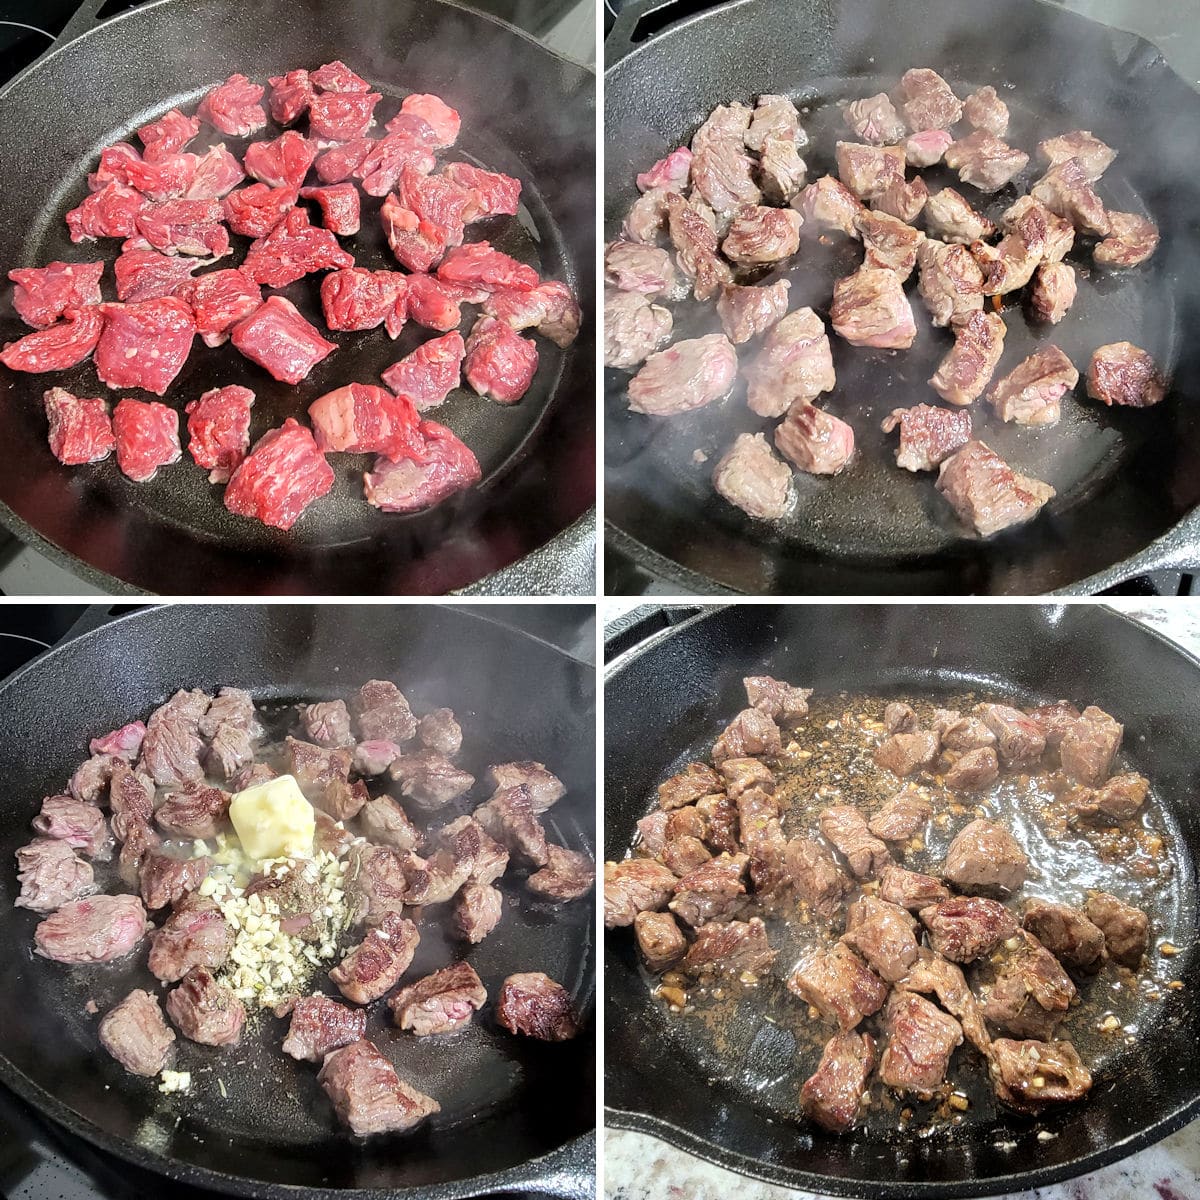 A collage of photos showing sirloin tips cooking in a cast iron pan.